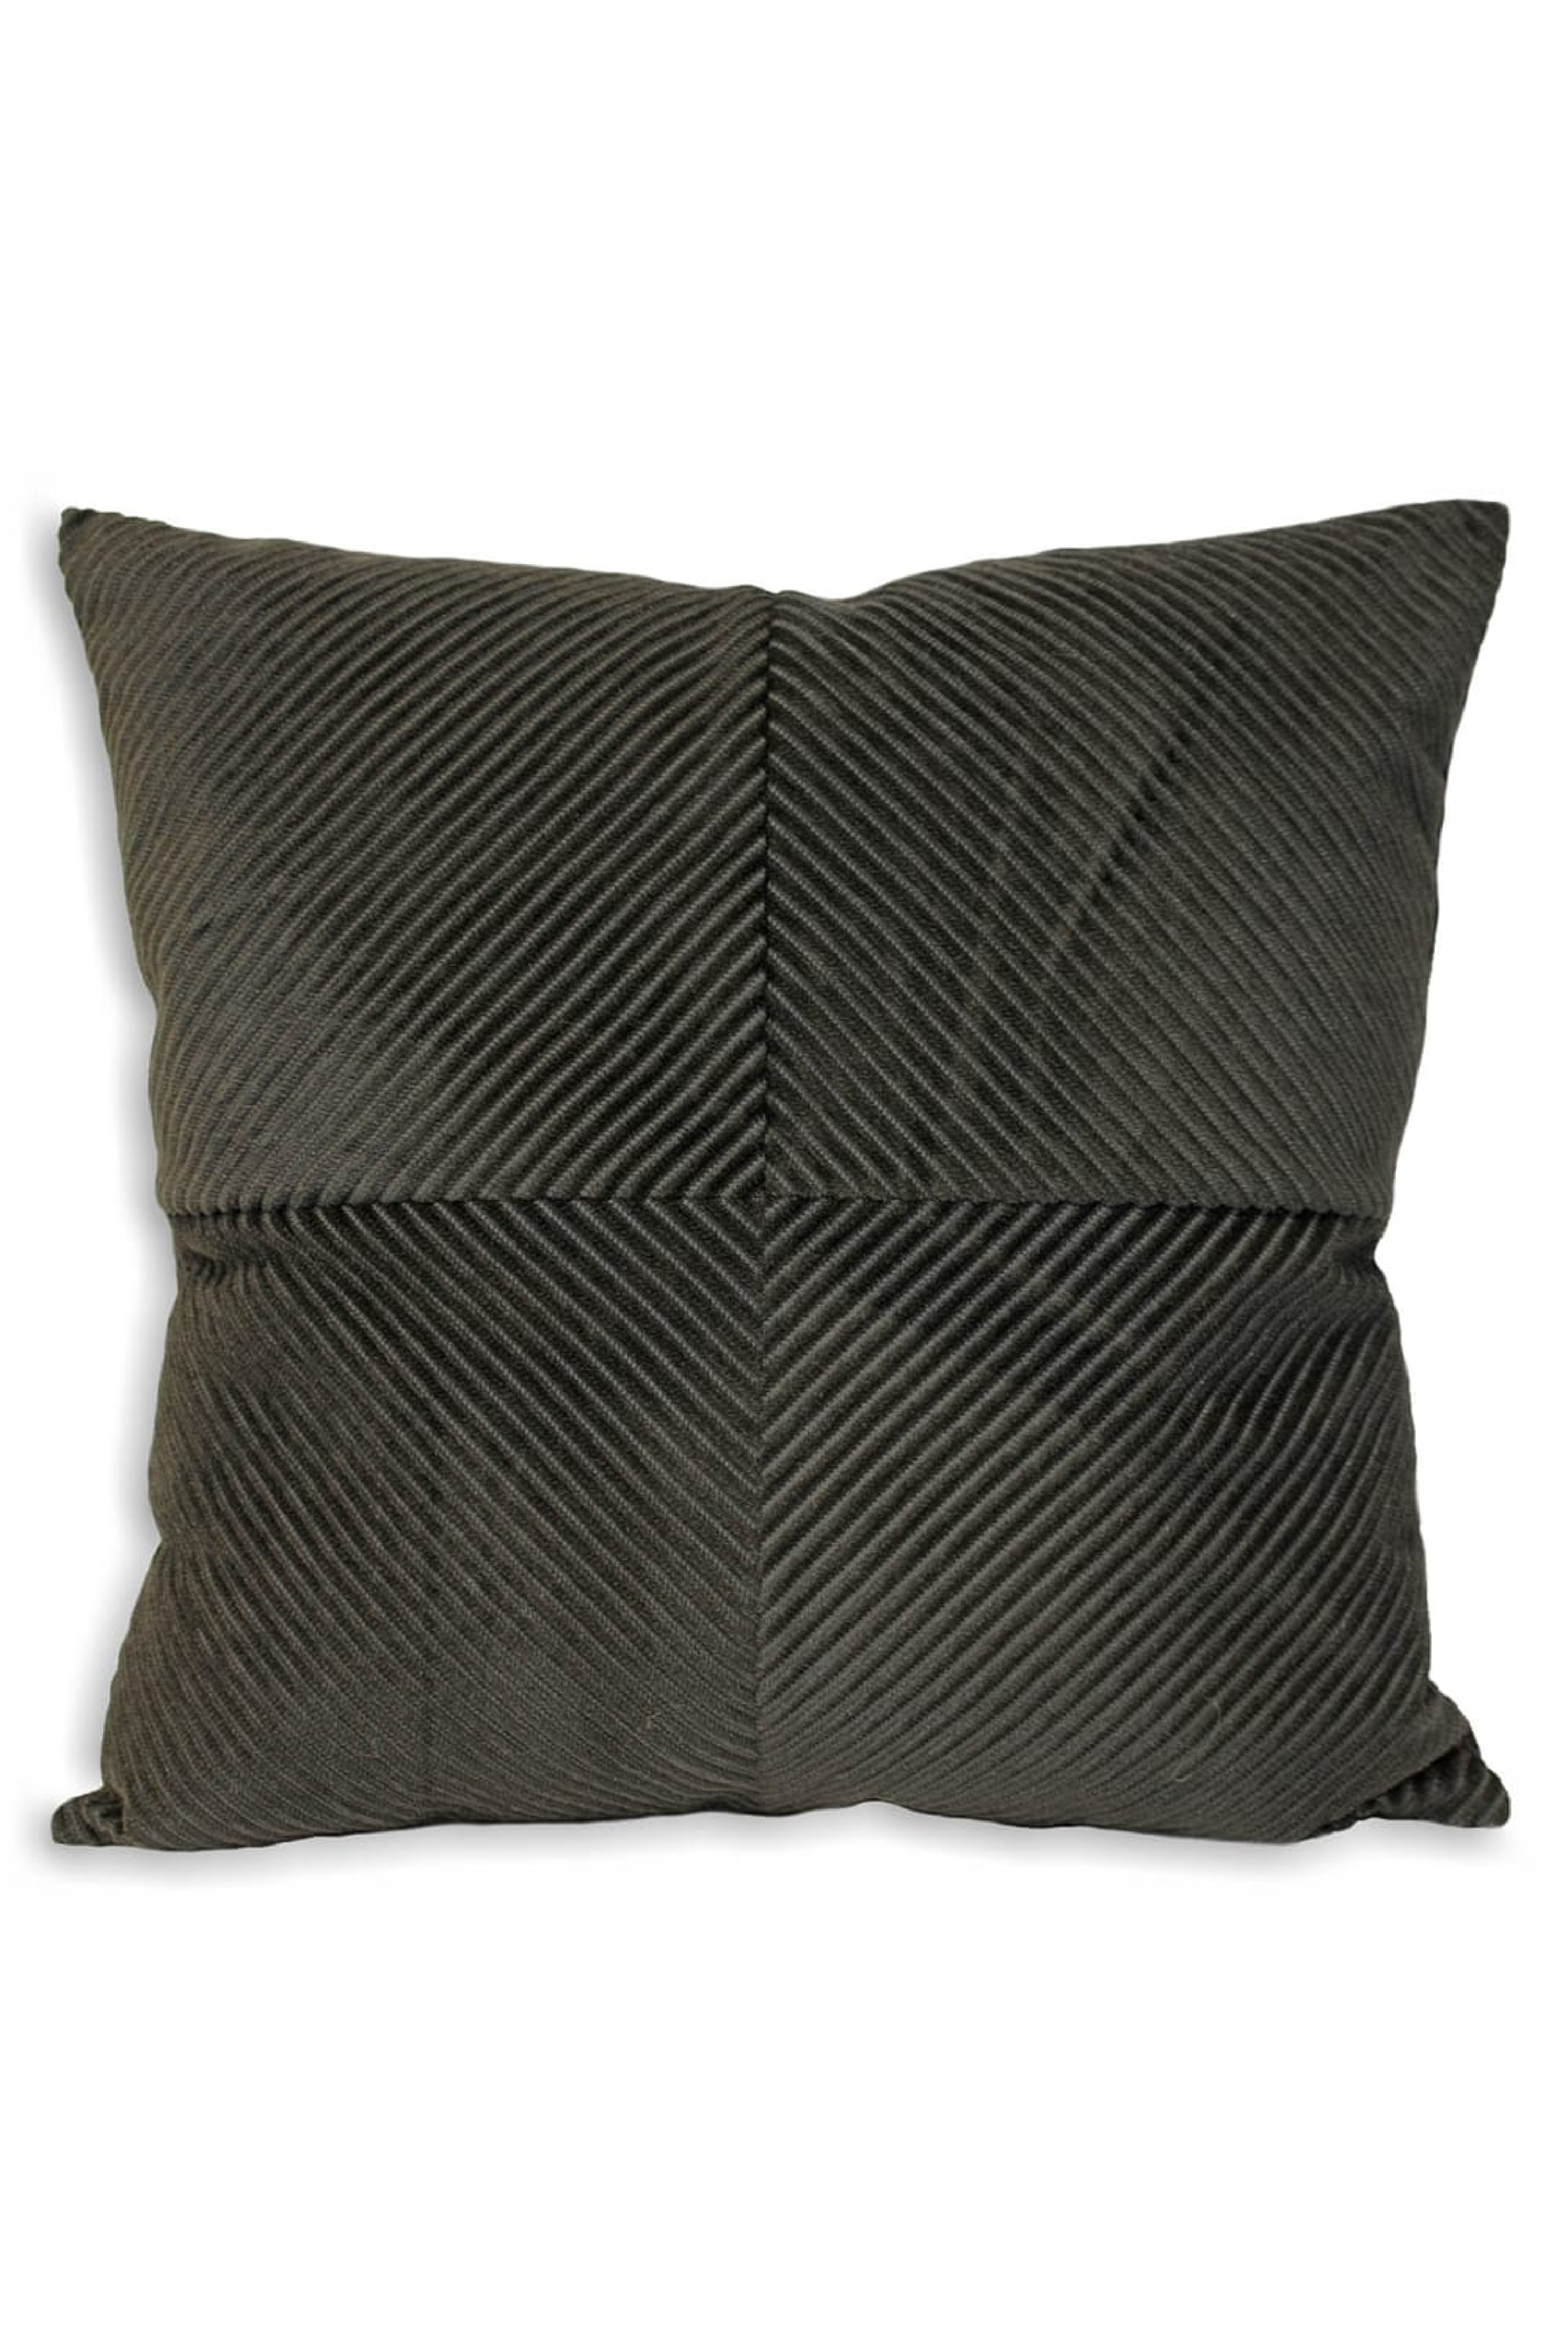 RIVA HOME RIVA HOME RIVA HOME INFINITY THROW PILLOW COVER (CHARCOAL) (22 X 22 INCH)